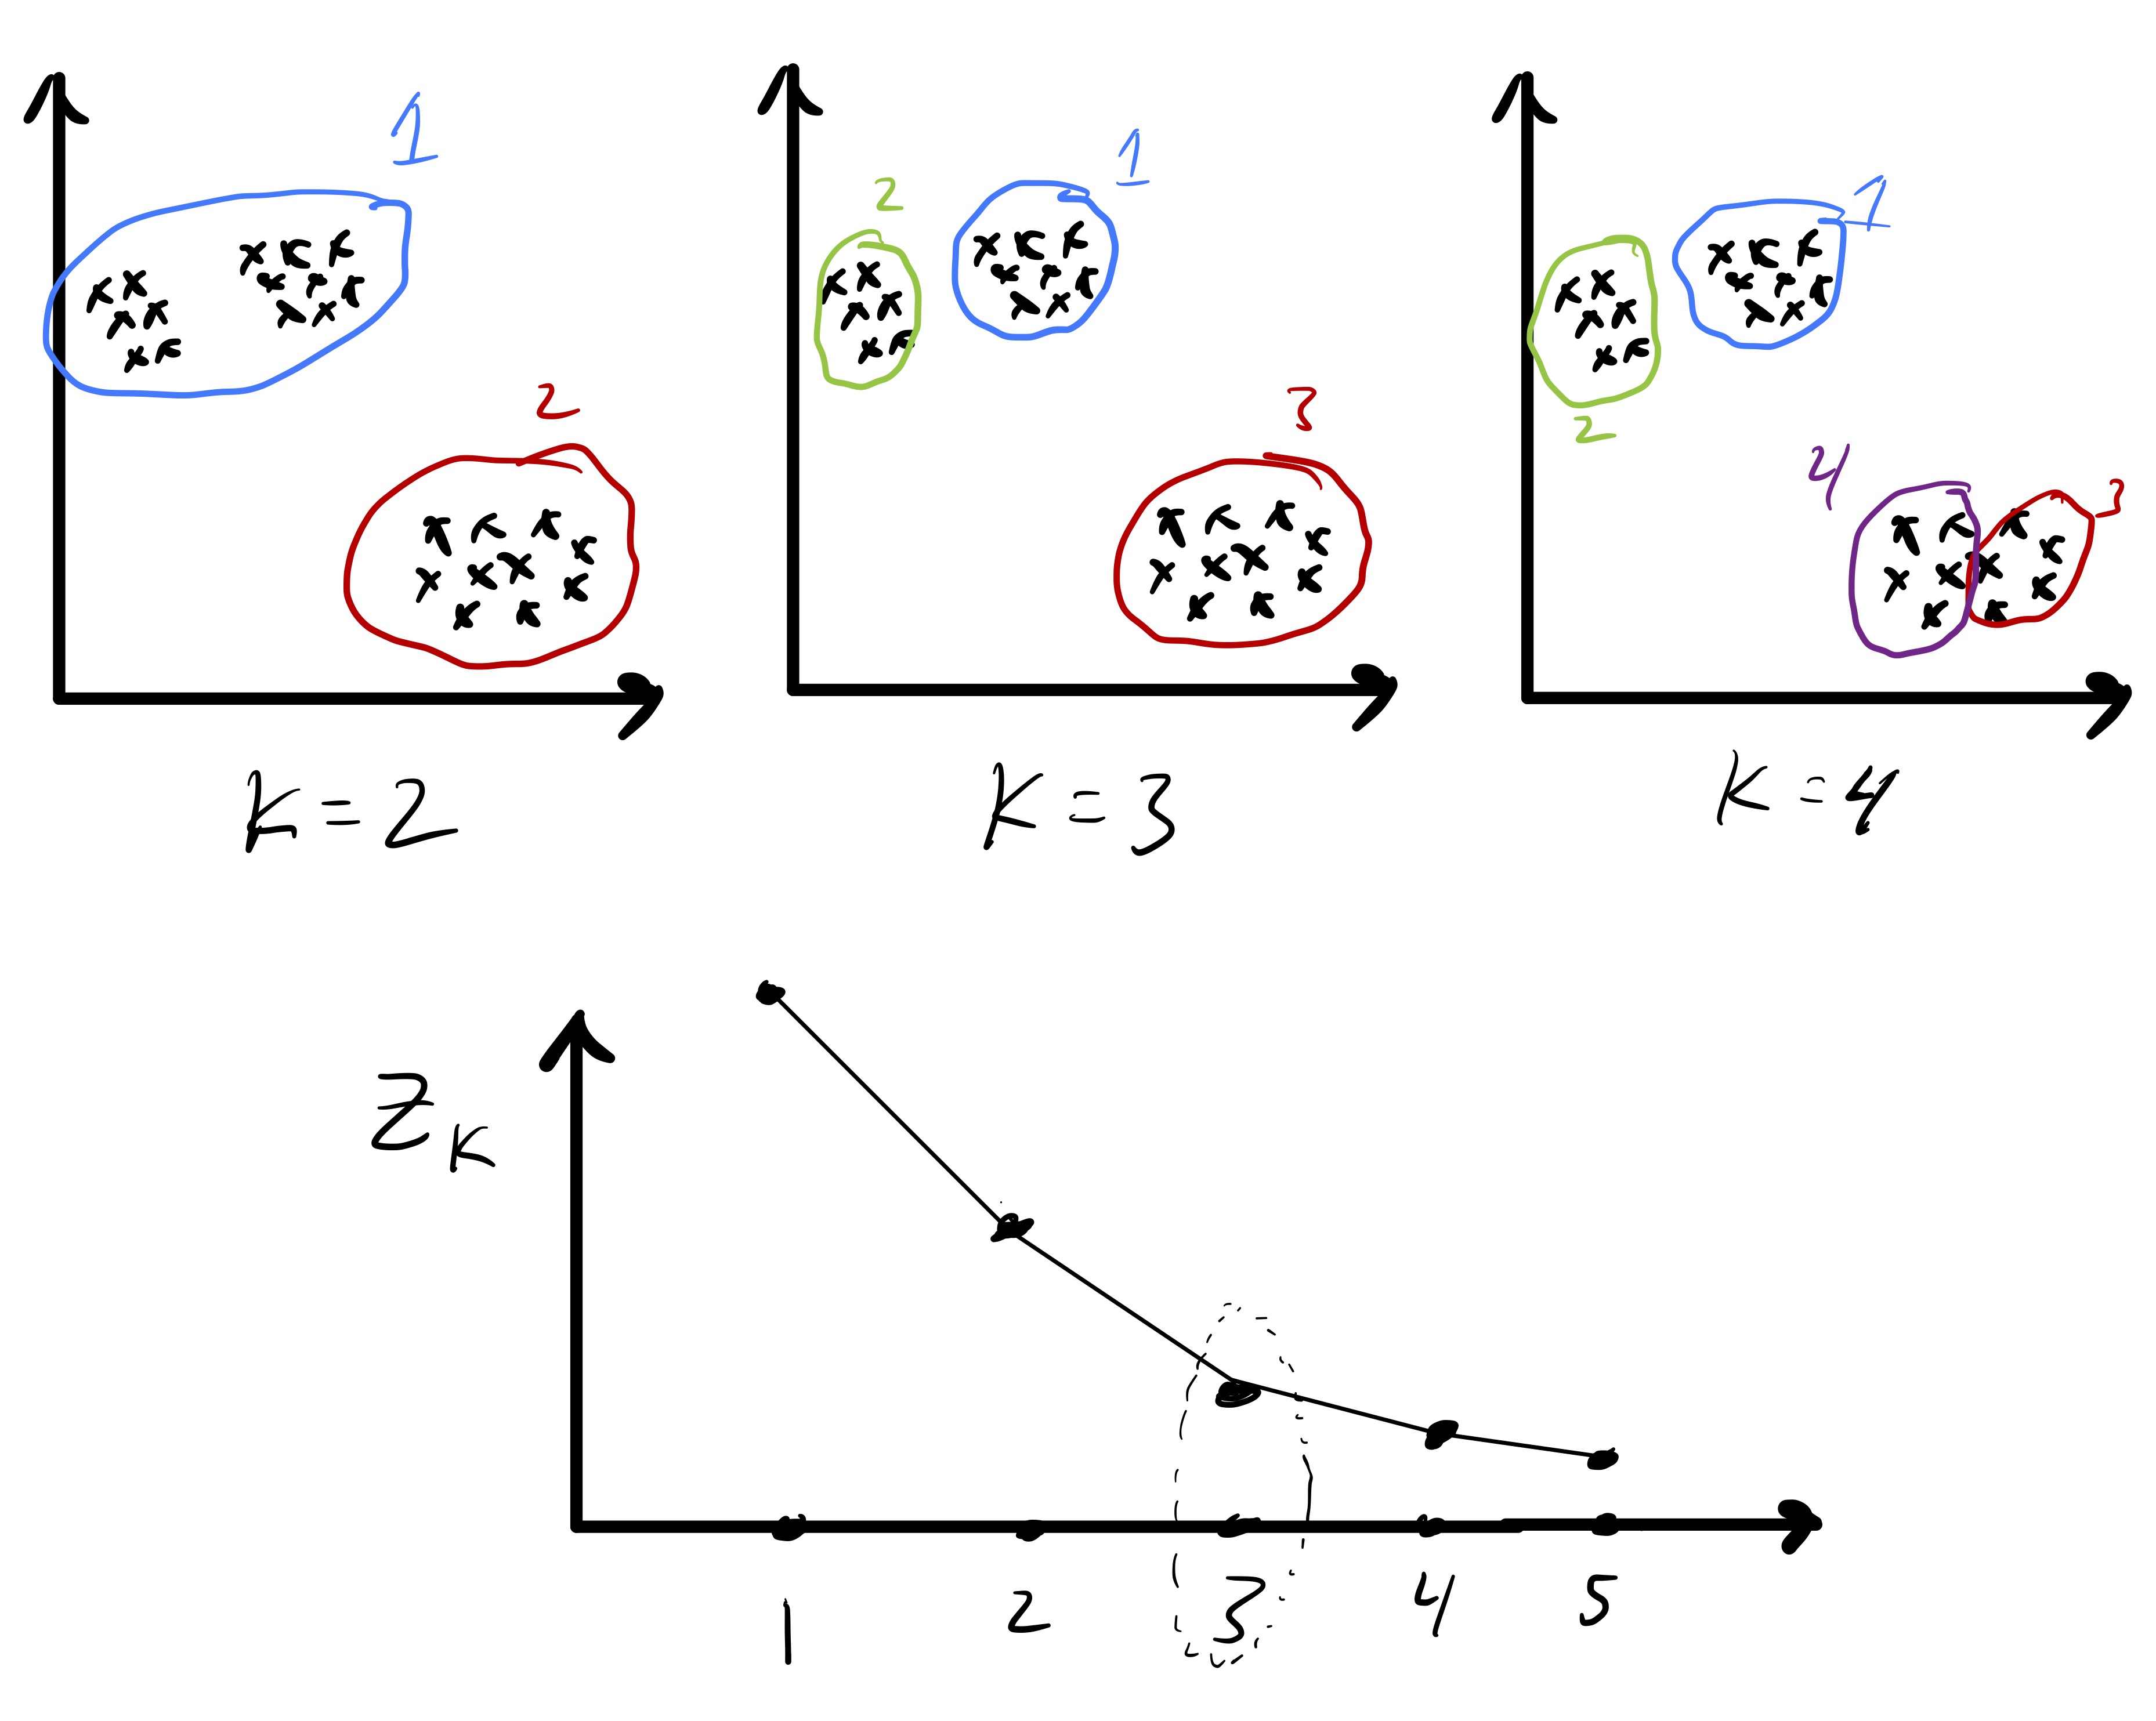 Figure 5: Choosing the number of clusters by looking for a “knee” in the objective function.